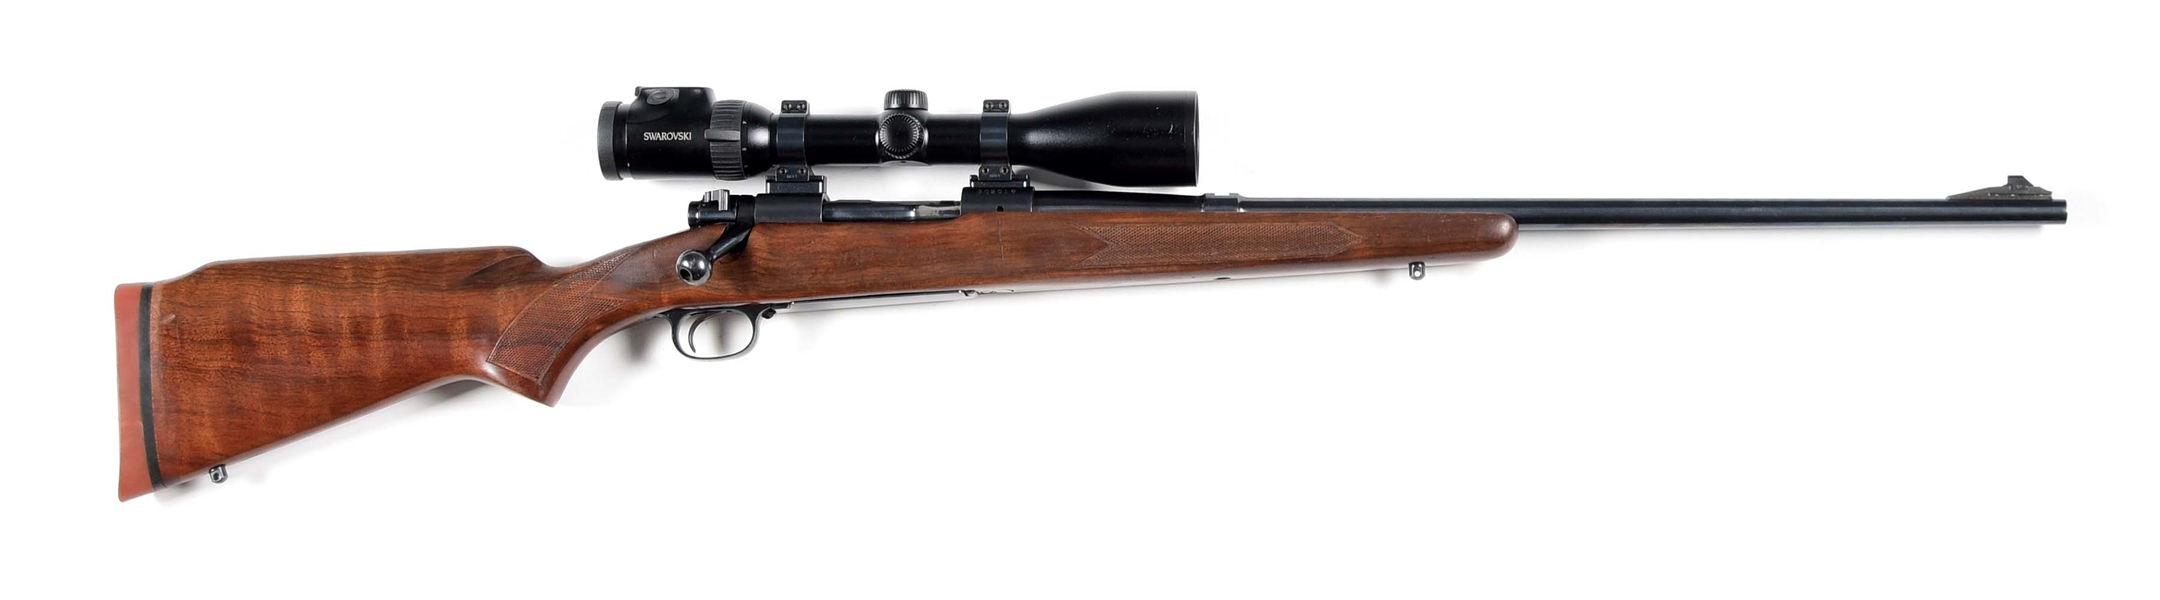 (C) WINCHESTER MODEL 70 BOLT-ACTION RIFLE WITH SWAROVSKI SCOPE.